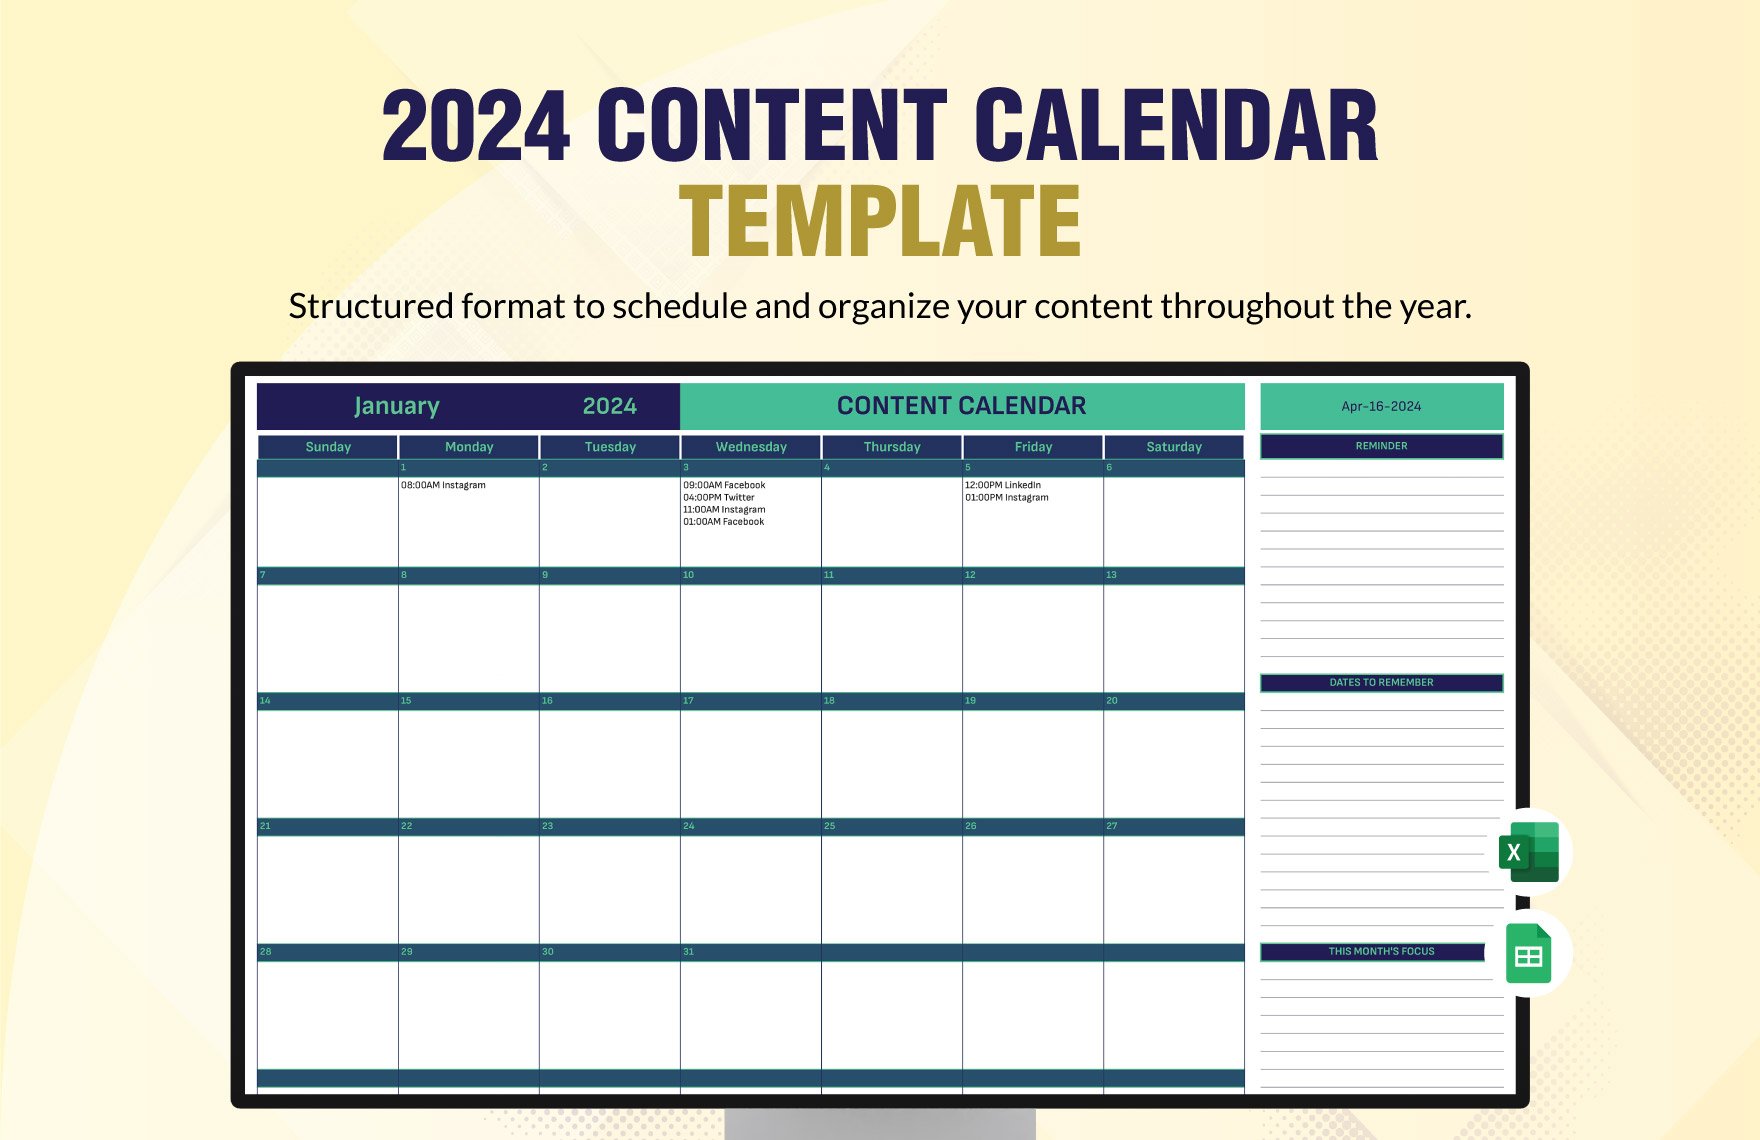 2024 Content Calendar Template in Excel, Google Sheets